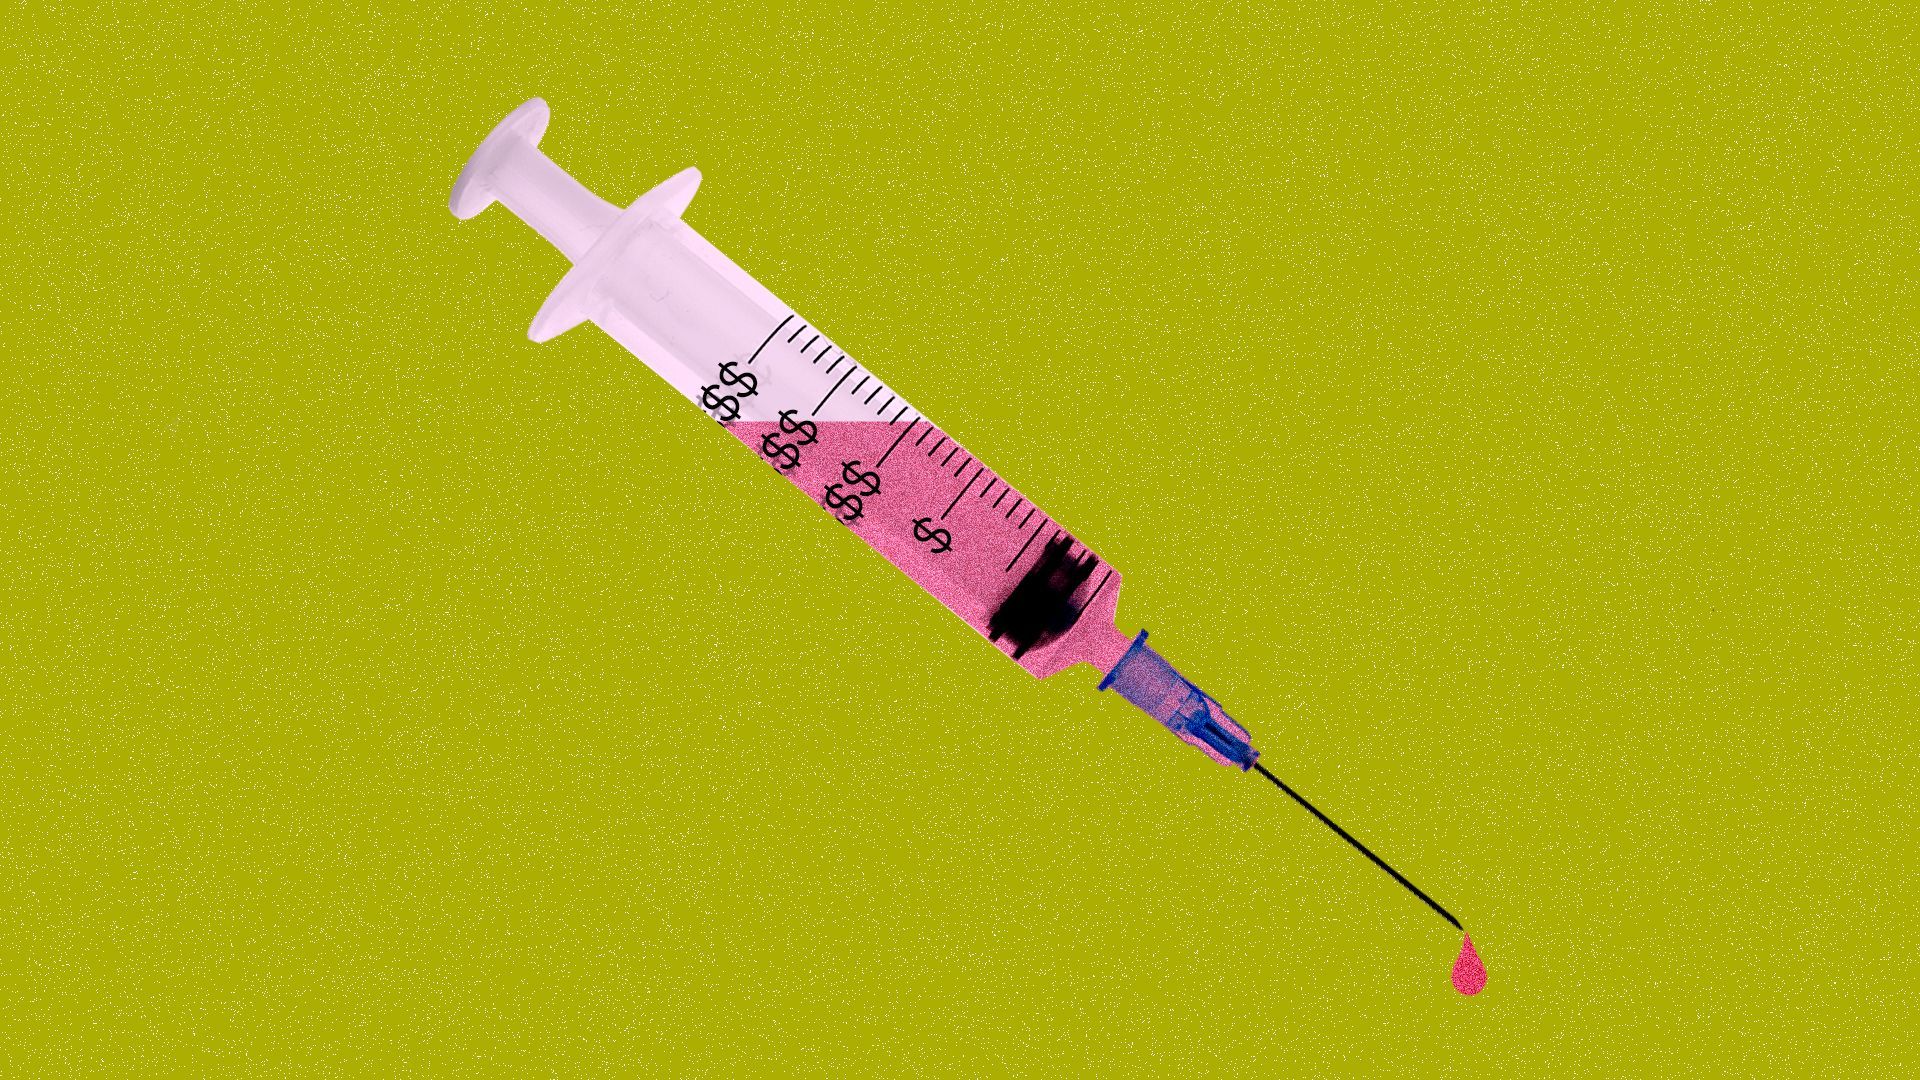 An insulin syringe with dollar signs along the side.